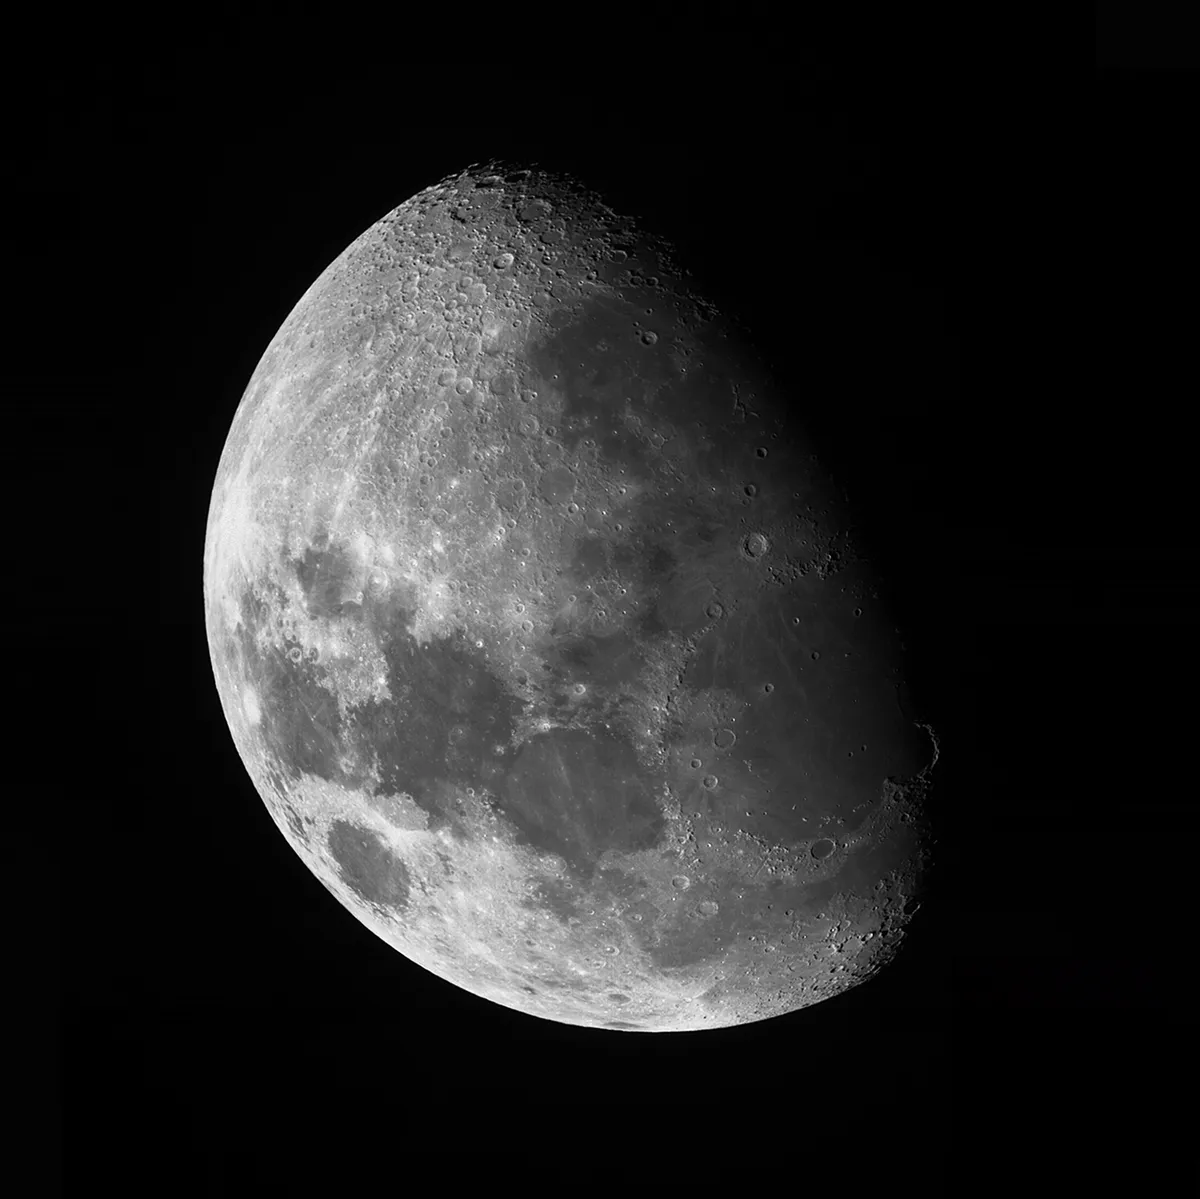 Moon by Stephen Dean, East Cowes, Isle of Wight. Equipment: Skywatcher 80mm ED, QHY 5.